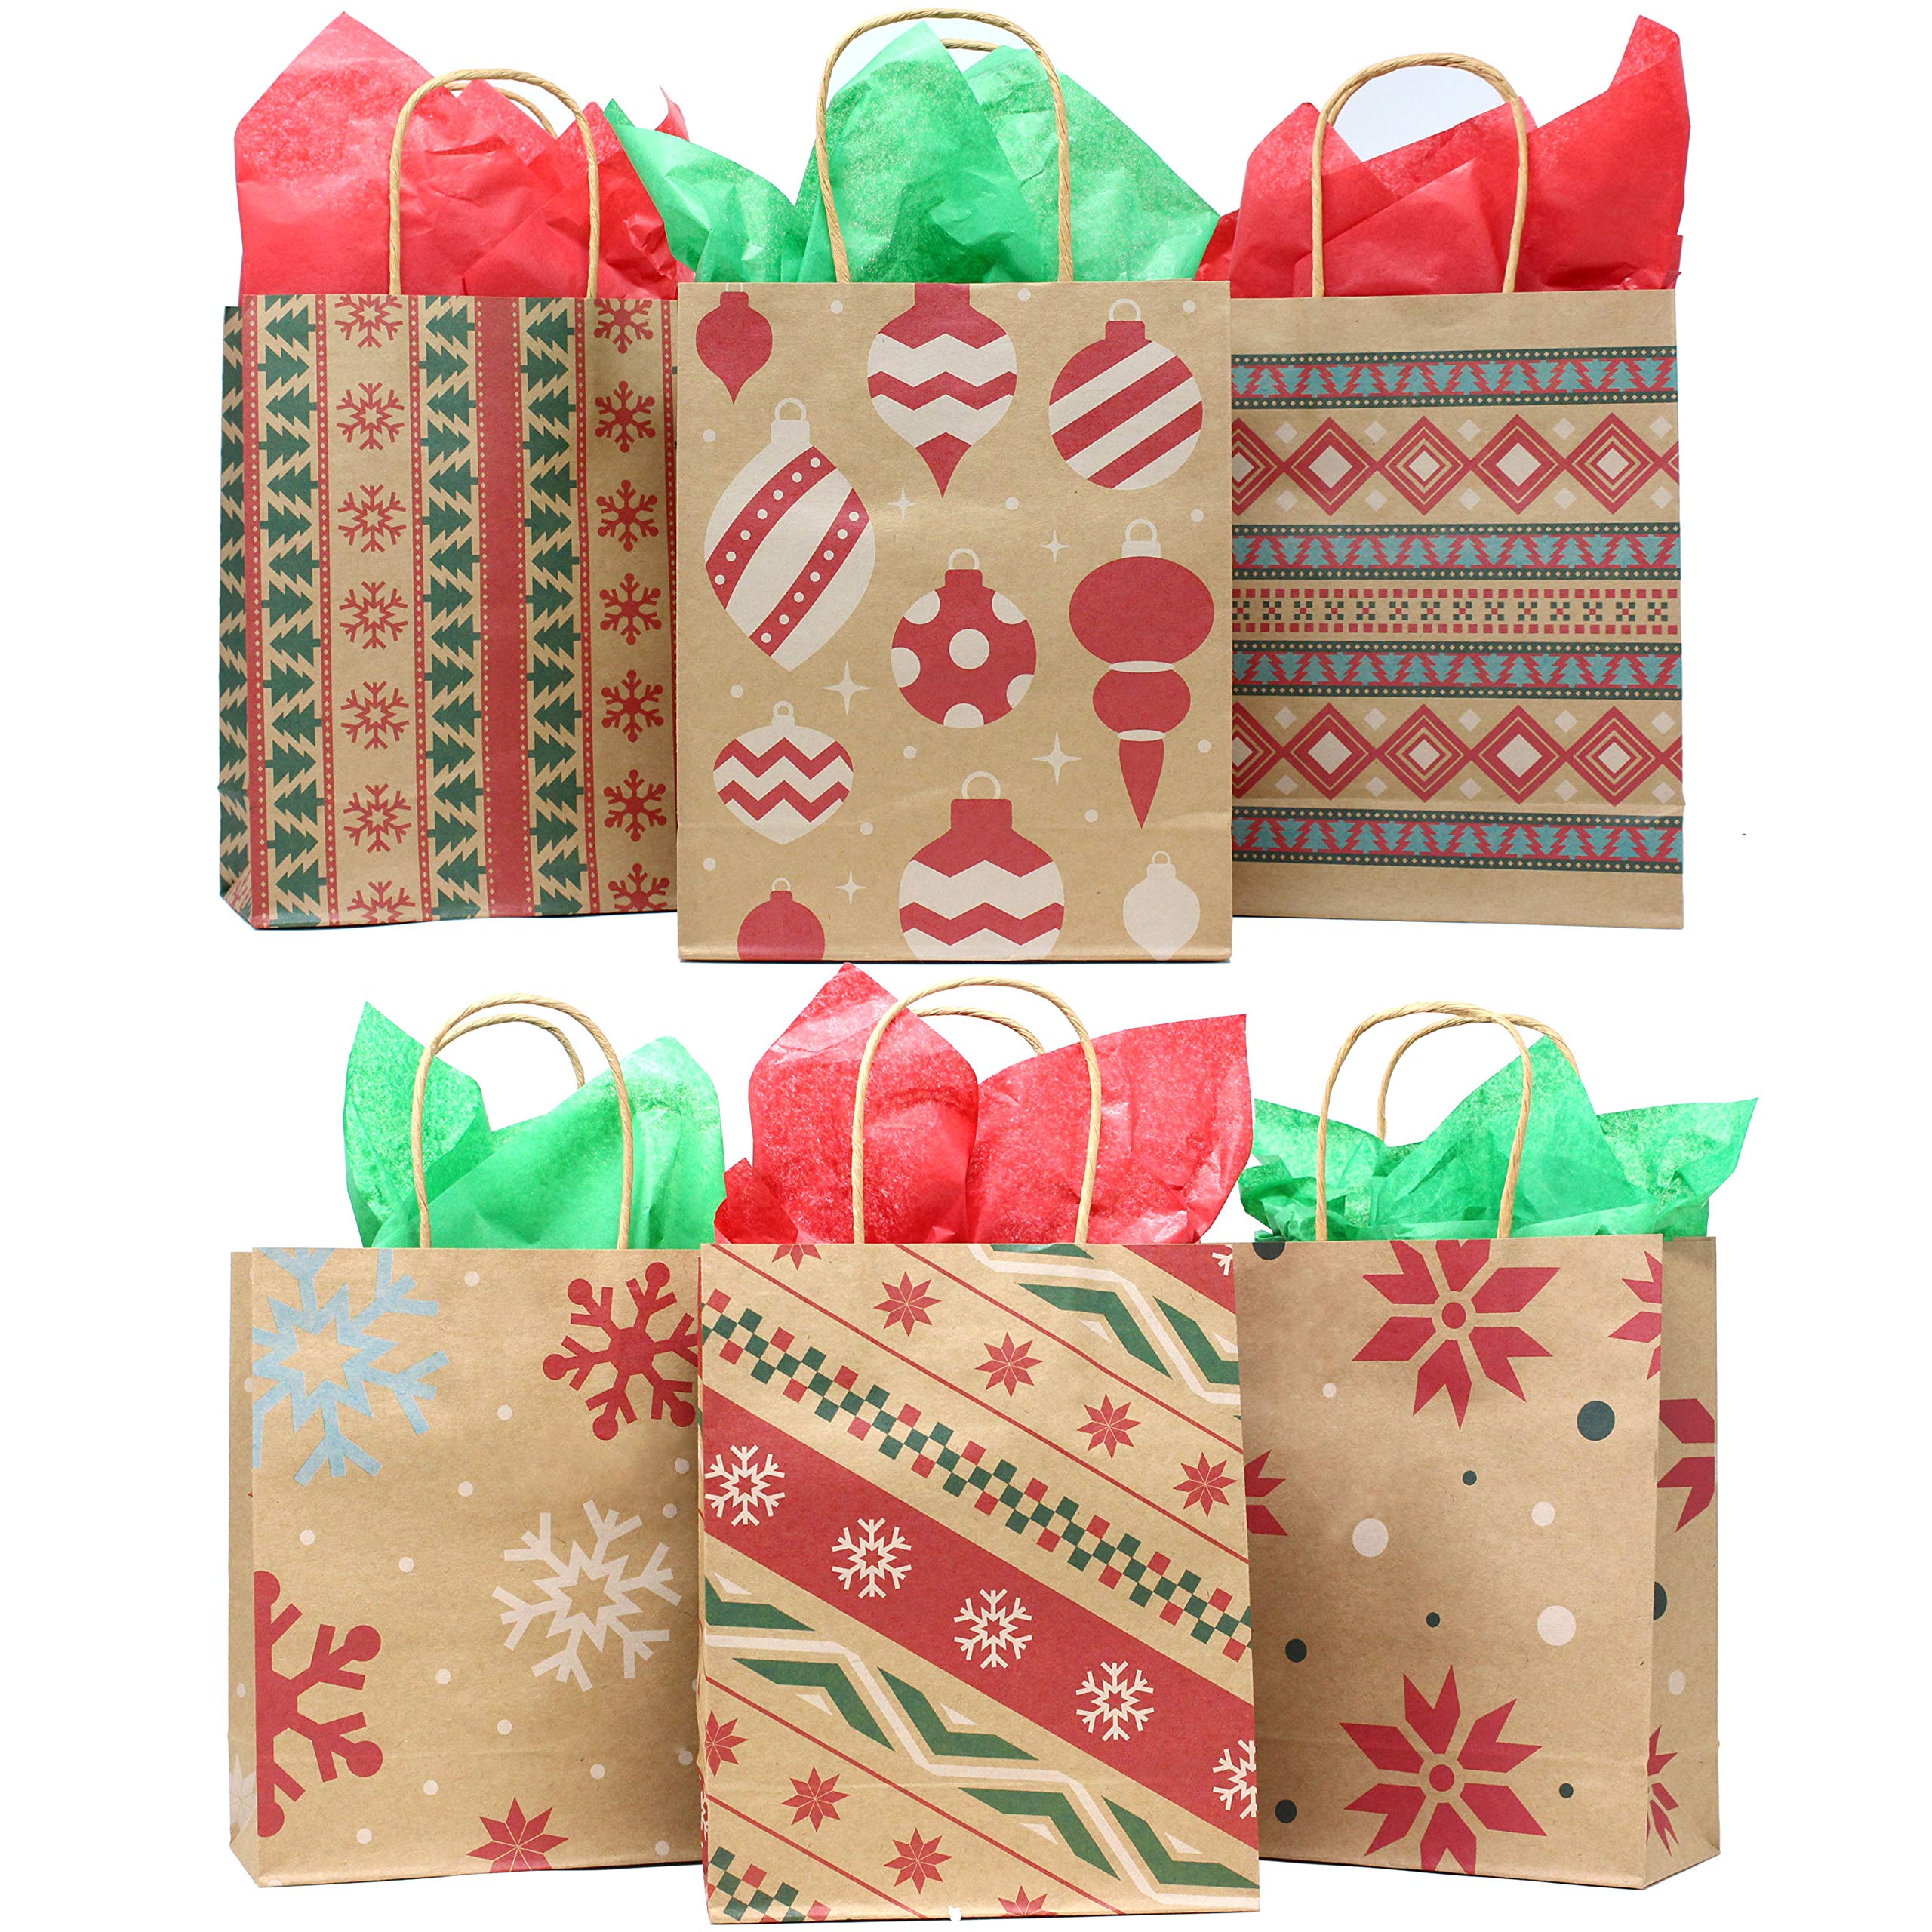 JOYIN 24 Christmas Kraft Gift Bags for Holiday Paper Gift Bags, Christmas Goody Bags, Xmas Gift Bags, Classrooms and Party Favors (9 x 7.3 x 3.3